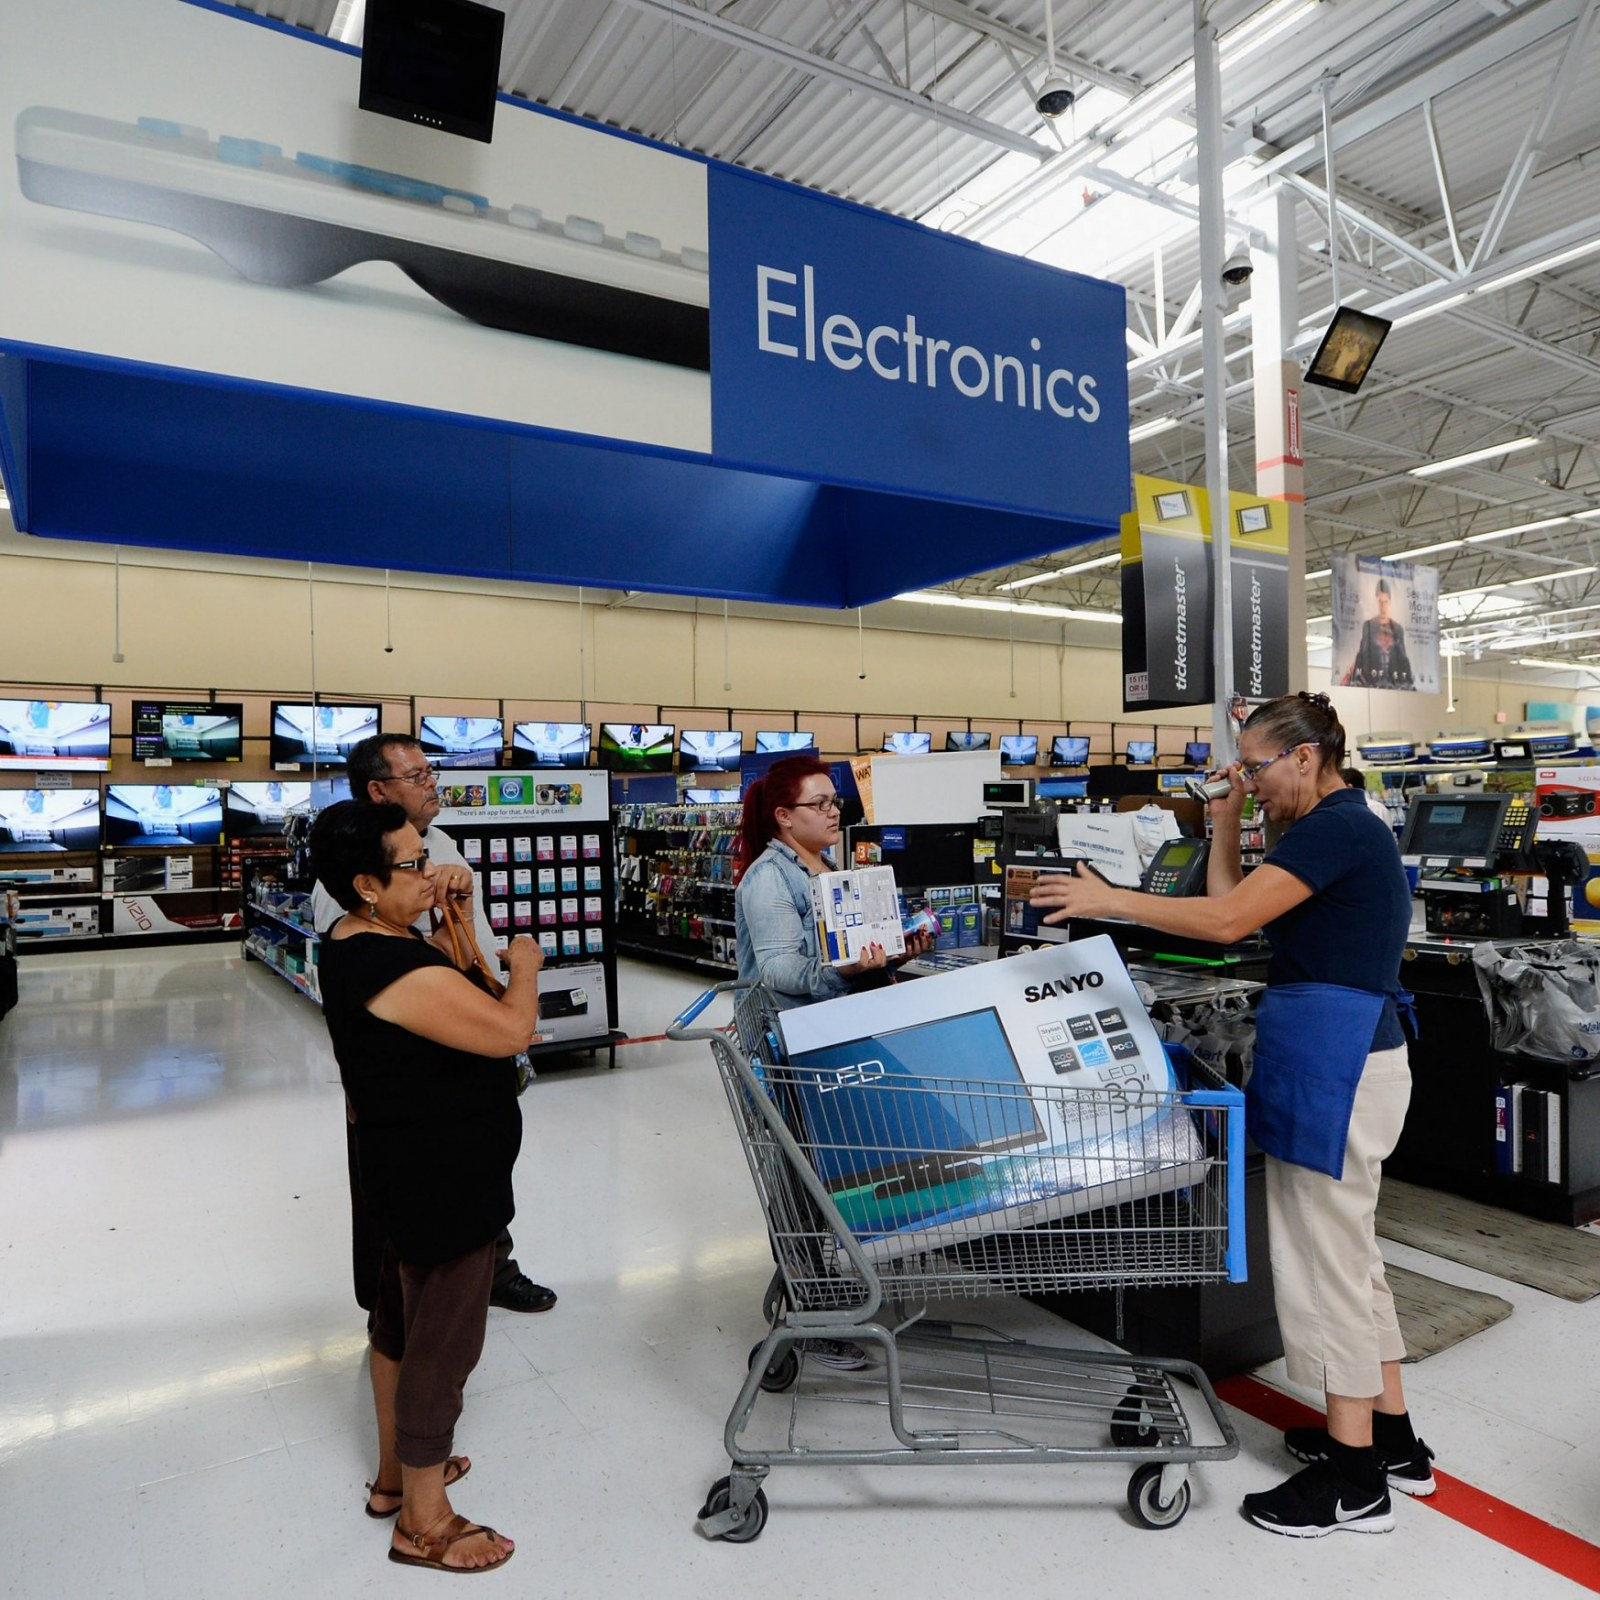 FREE $20 to Spend on Electronics at Walmart